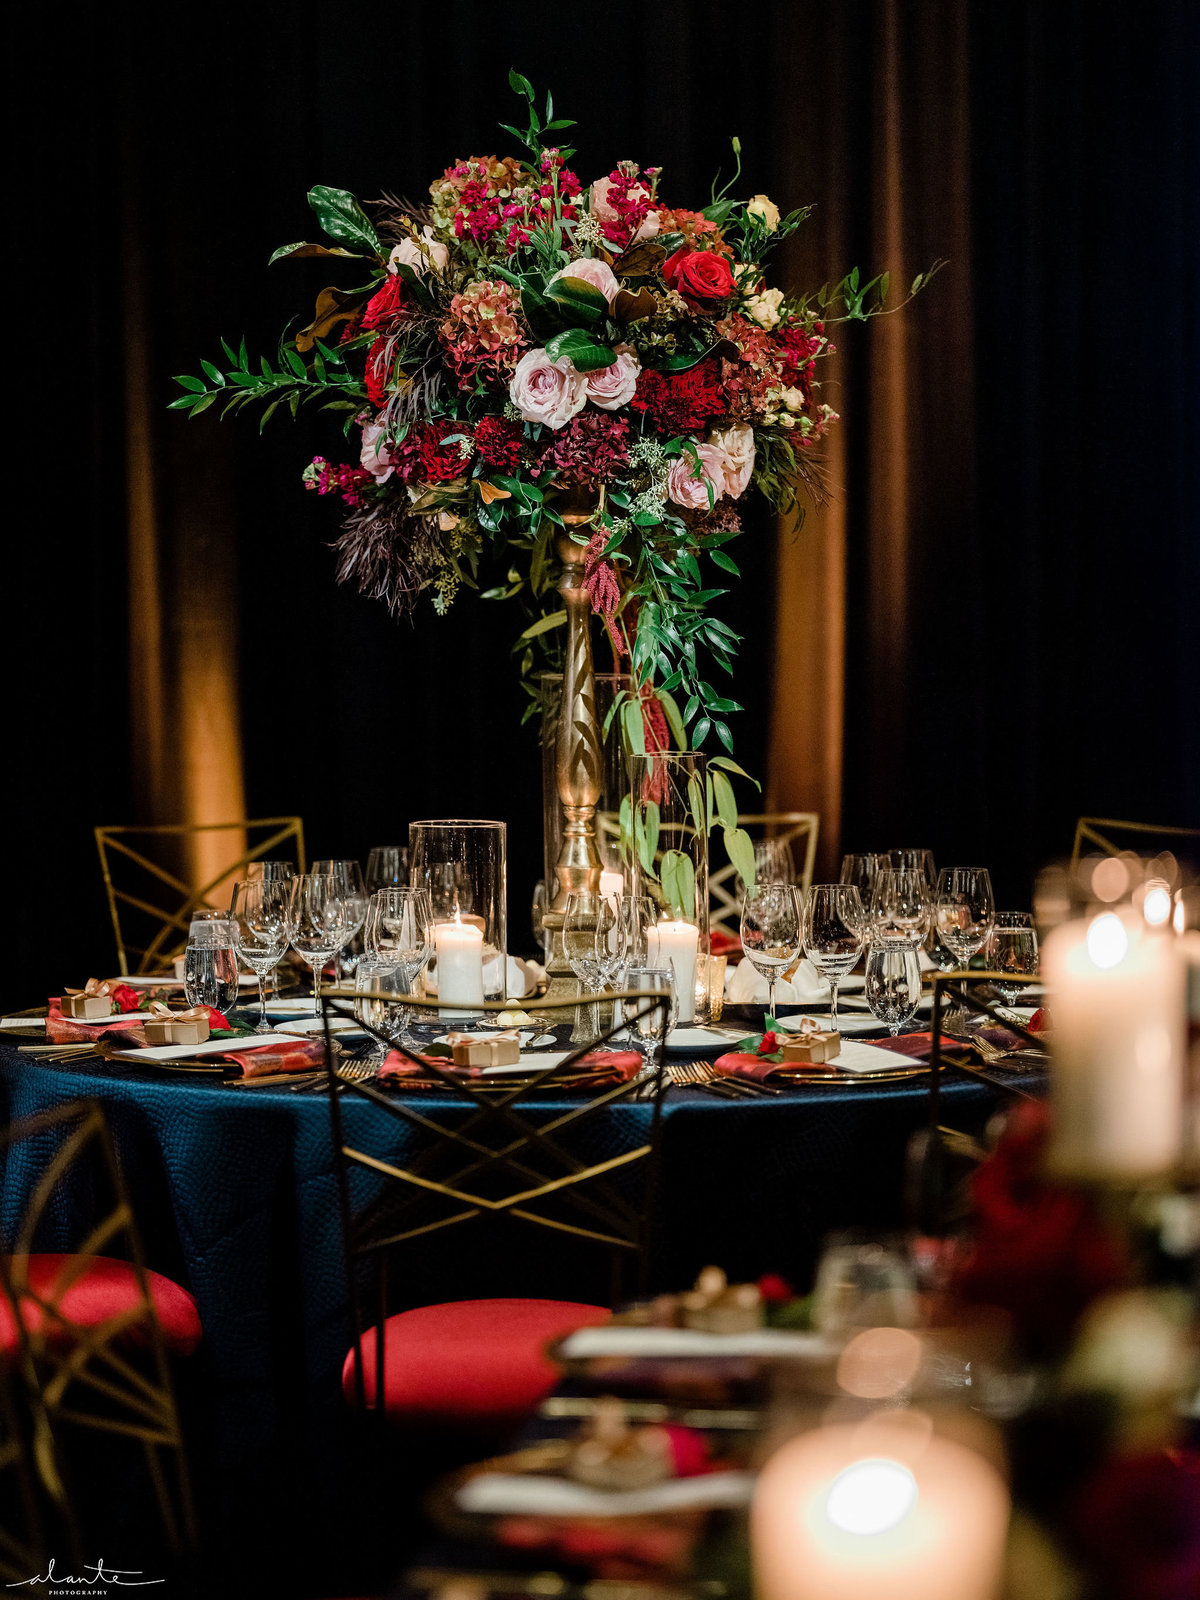 elevated winter flower centerpiece in deep red on table with navy blue linen, red seated chairs, blue draping